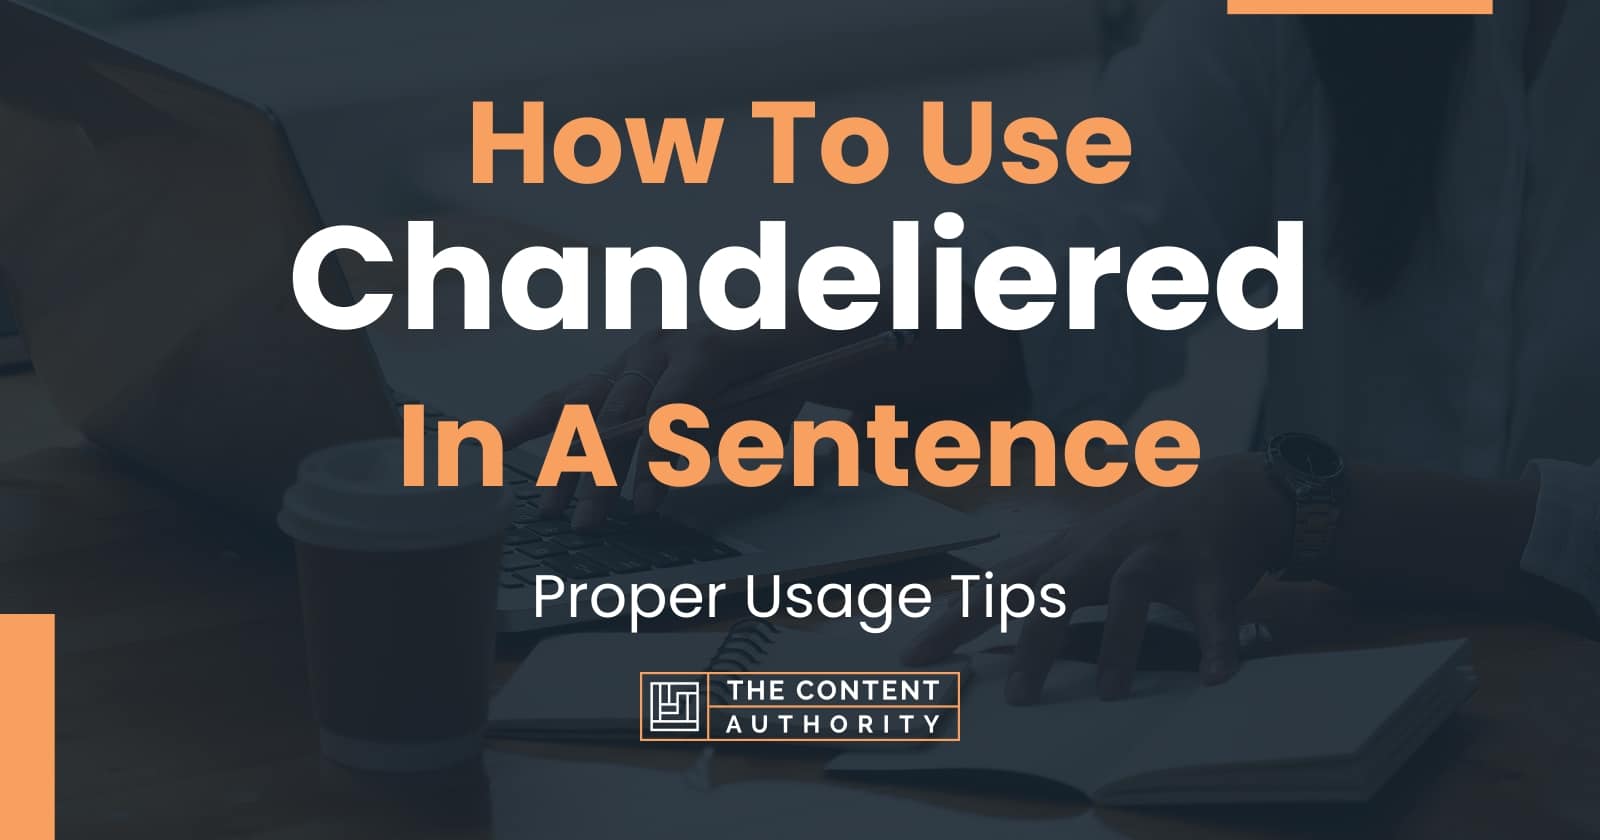 How To Use Chandeliered In A Sentence 